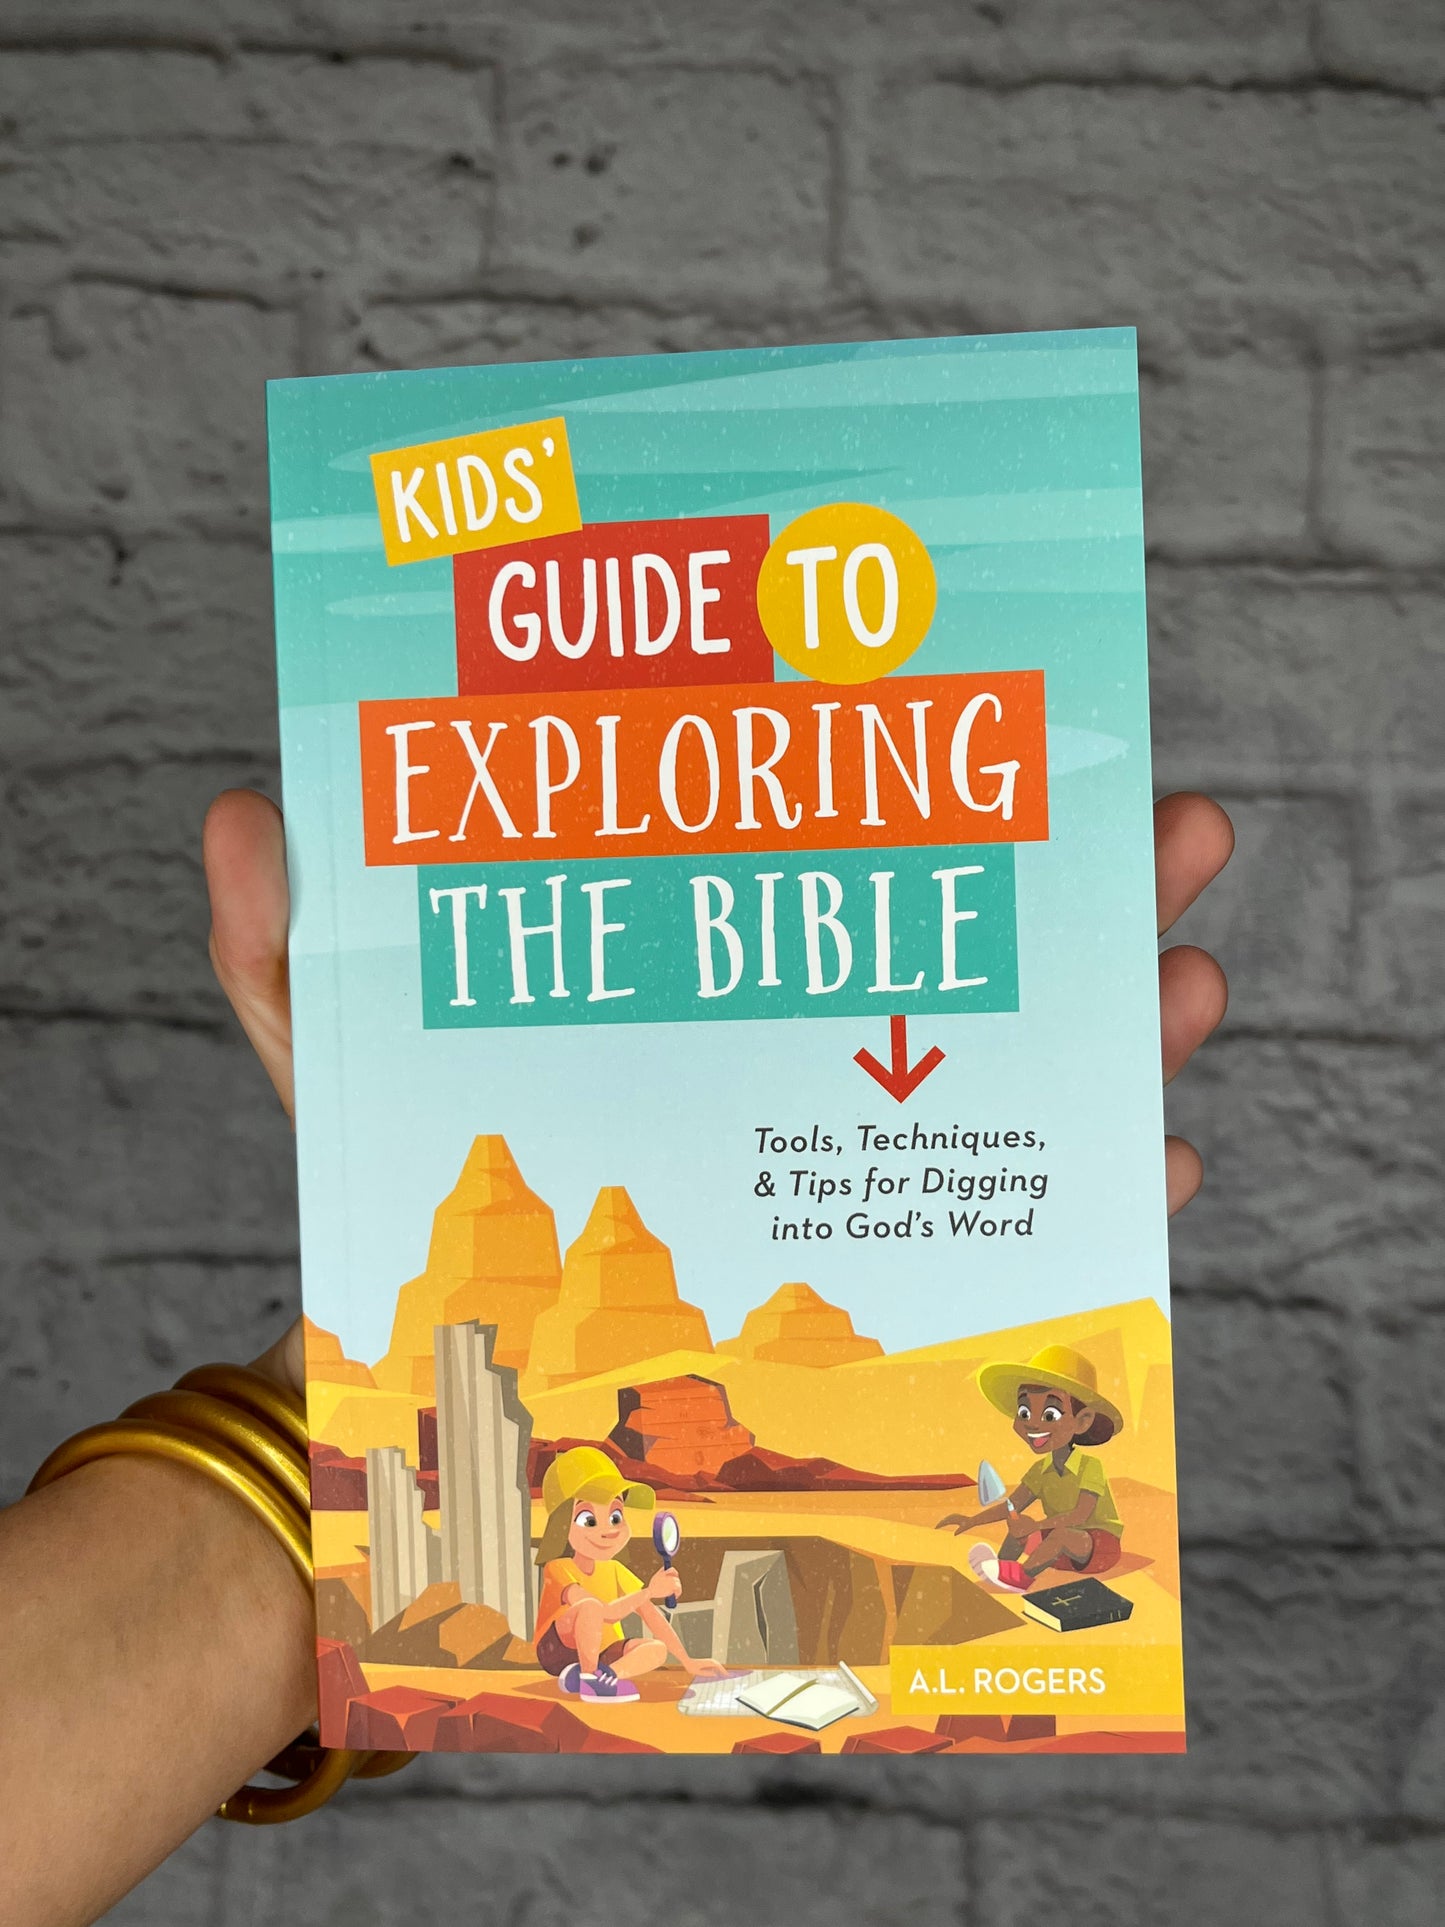 Kids, Guide to Exploring the Bible